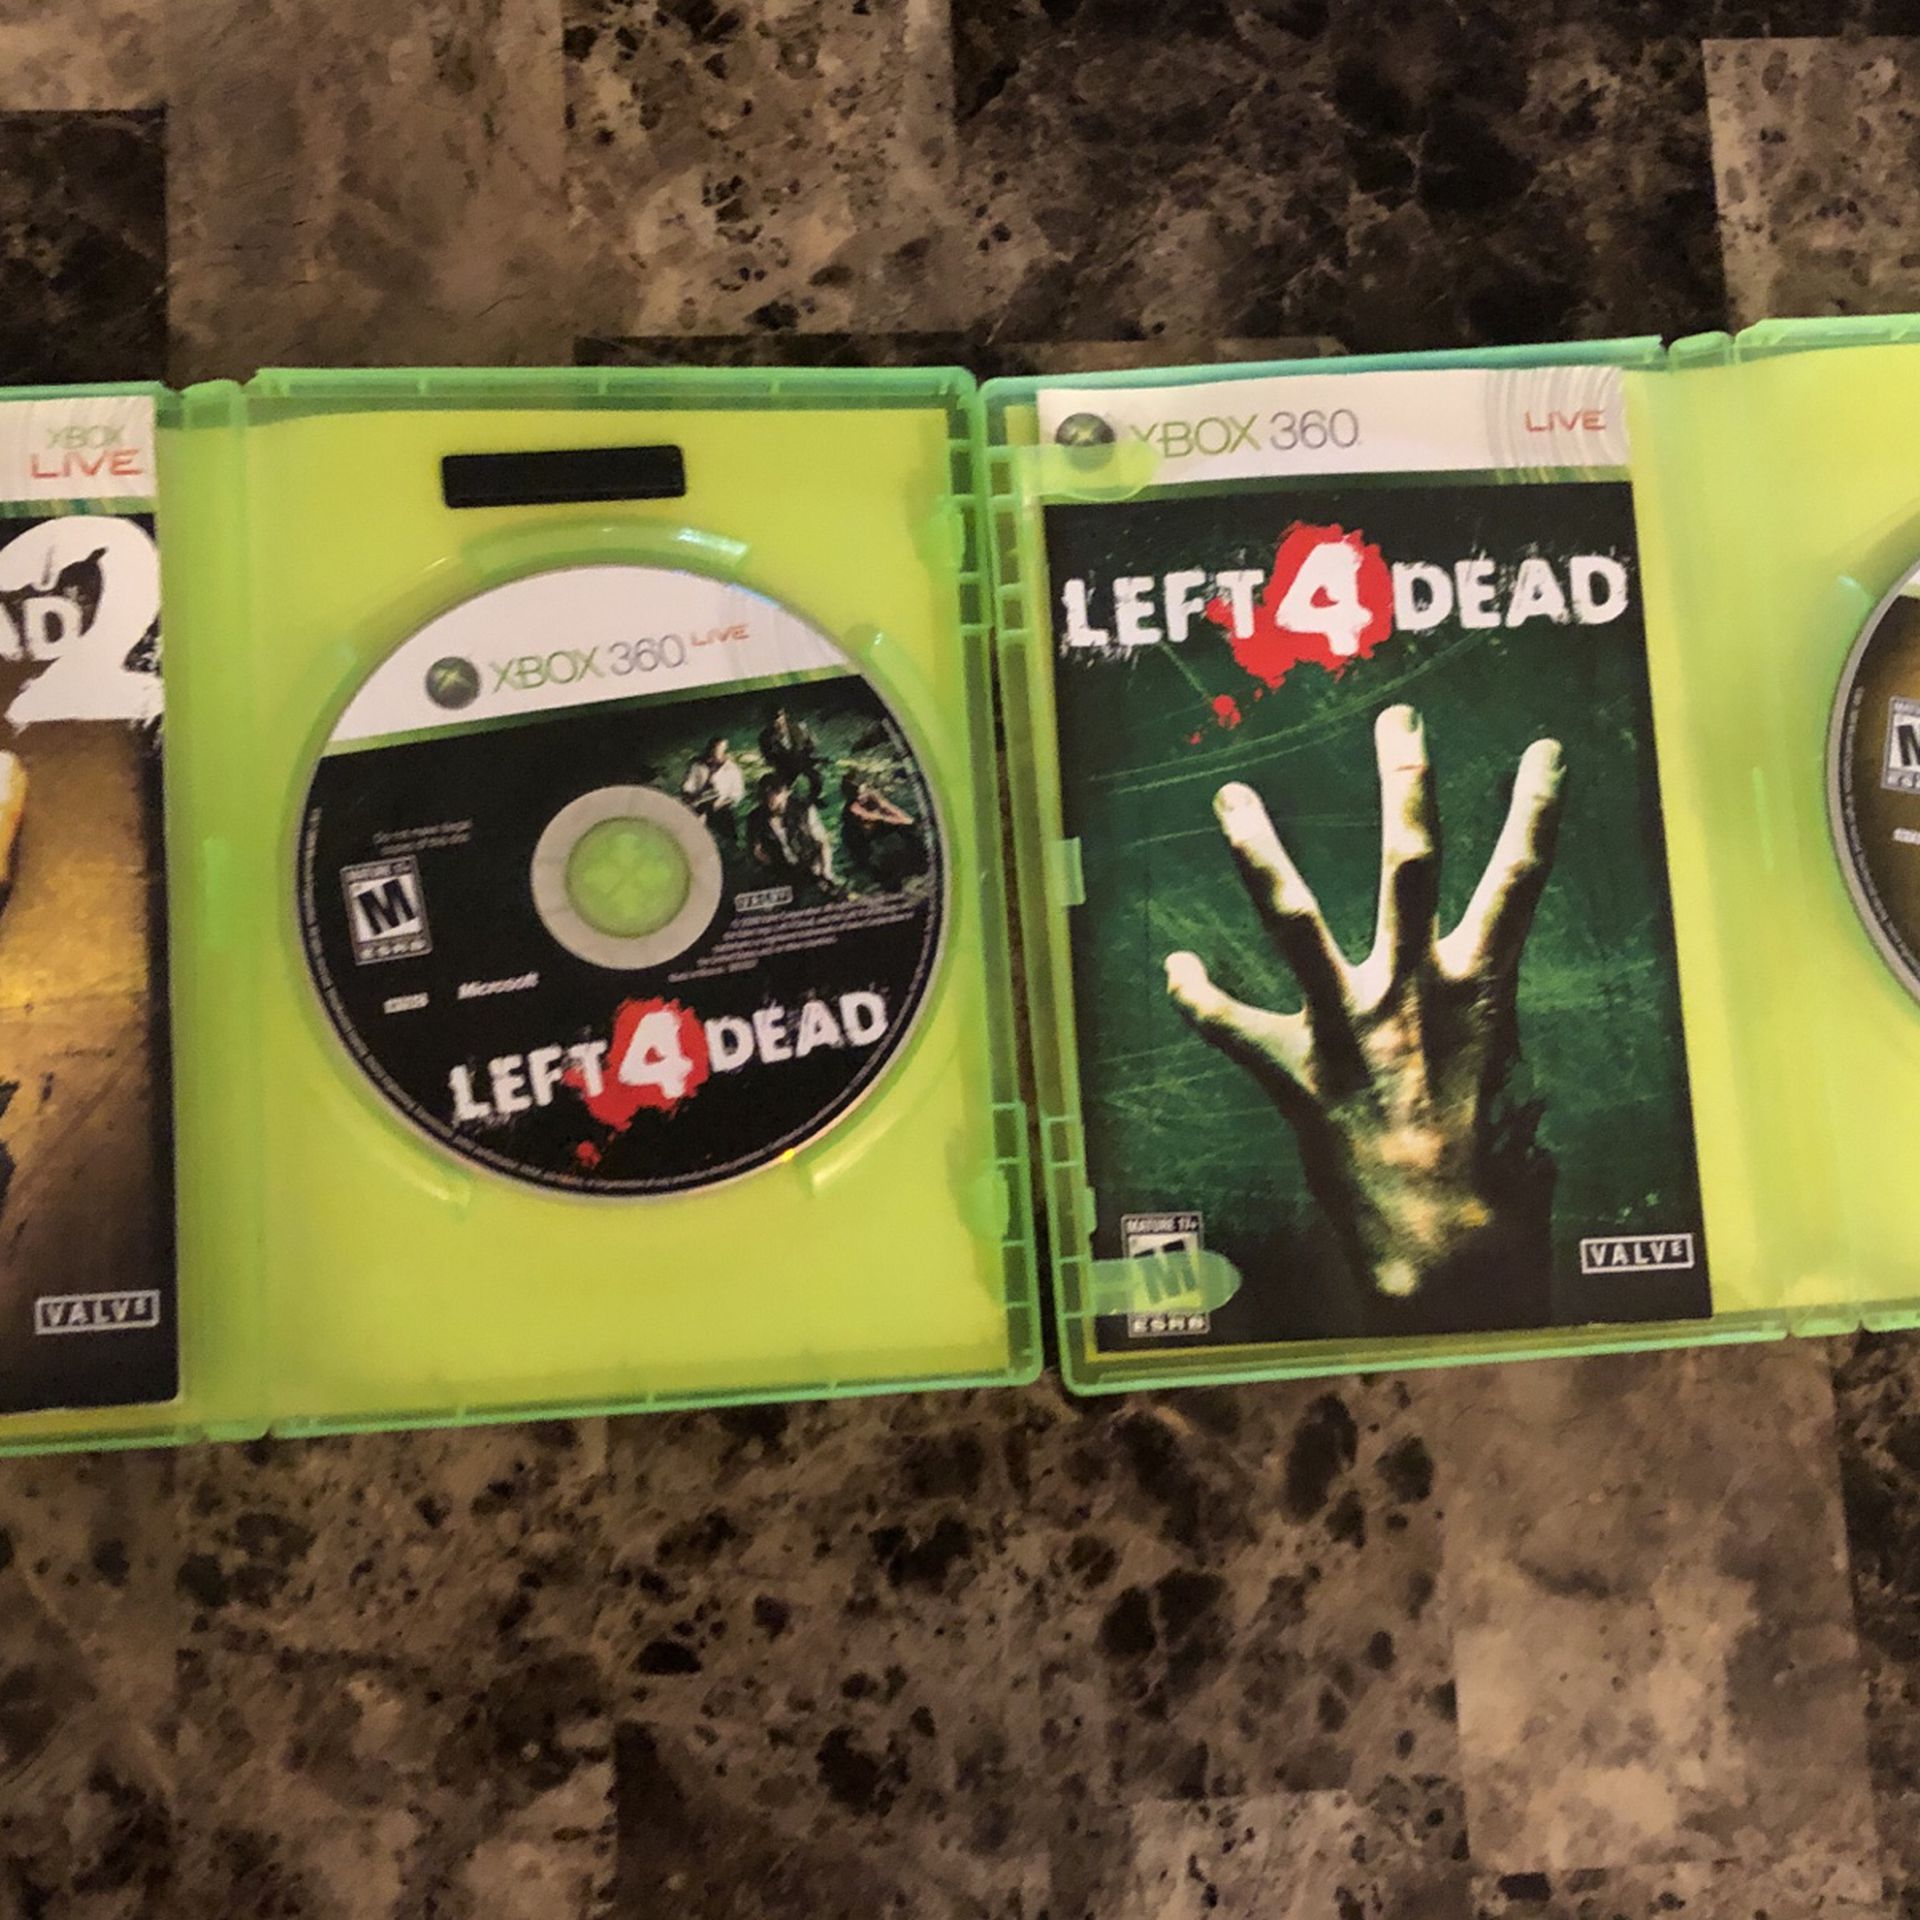 Xbox, xbox 360 and Ps2 games. For sale or trade. Conkers left 4 dead for  Sale in Seattle, WA - OfferUp